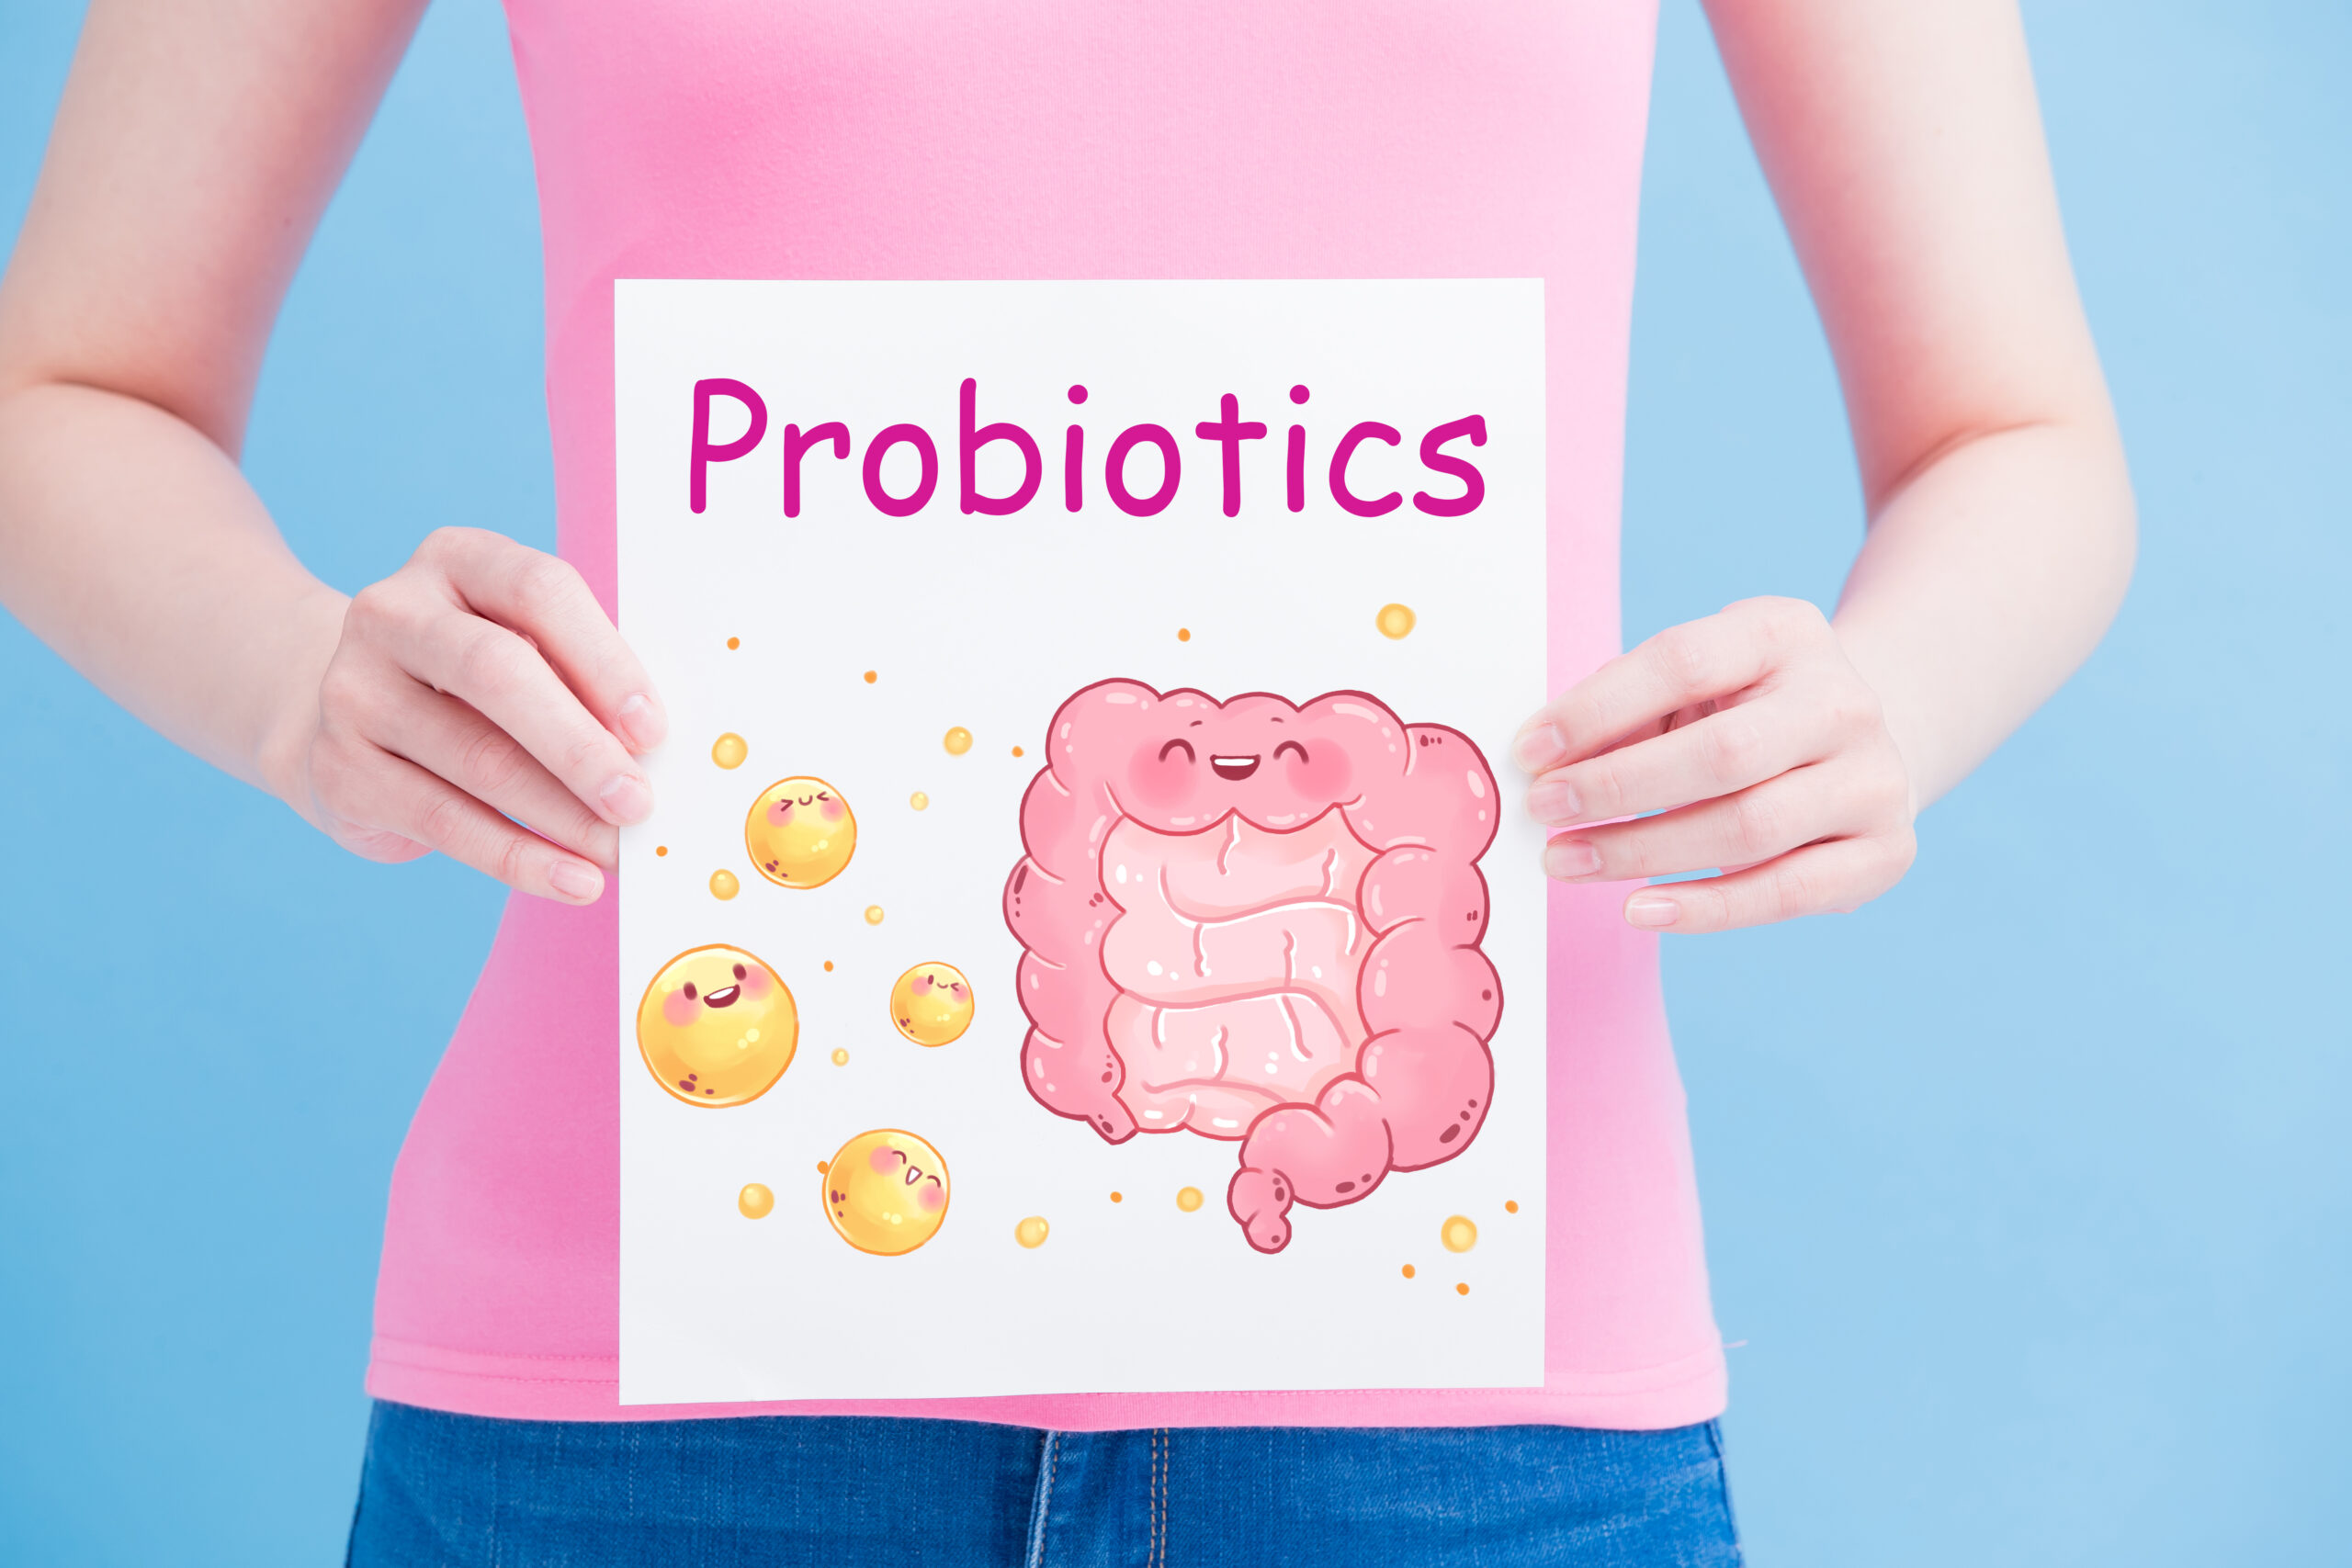 Person holding a sign that says “Probiotics” with an image of a digestive system on it.